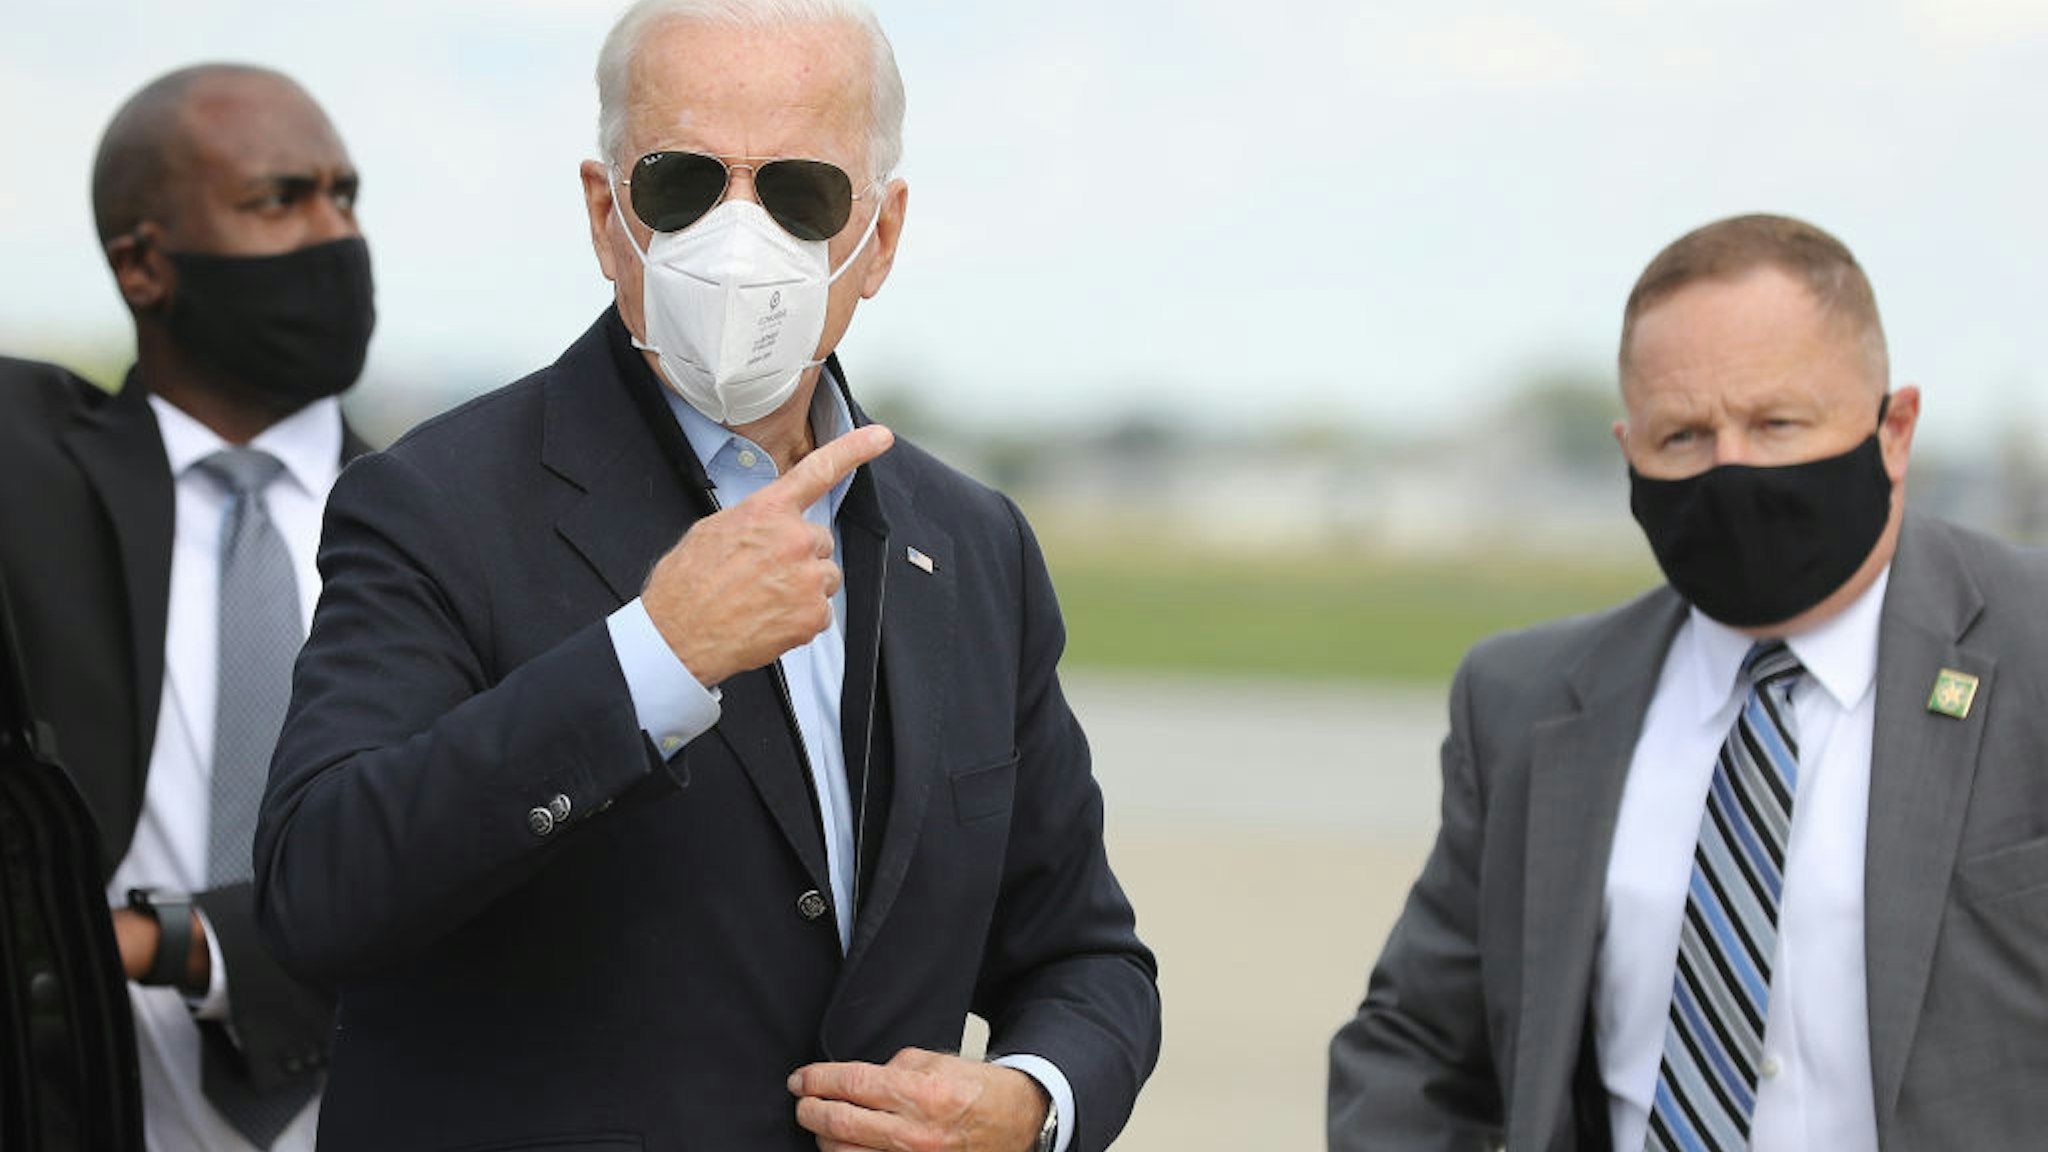 Democratic presidential nominee and former Vice President Joe Biden speaks briefly with journalists before traveling to Grand Rapids, Michigan, at New Castle County Airport October 2, 2020 in New Castle, Delaware. Biden said he tested negative twice Friday for the coronavirus after it was reported that U.S. President Donald Trump and first lady Melania Trump tested positive for COVID-19. (Photo by Chip Somodevilla/Getty Images)